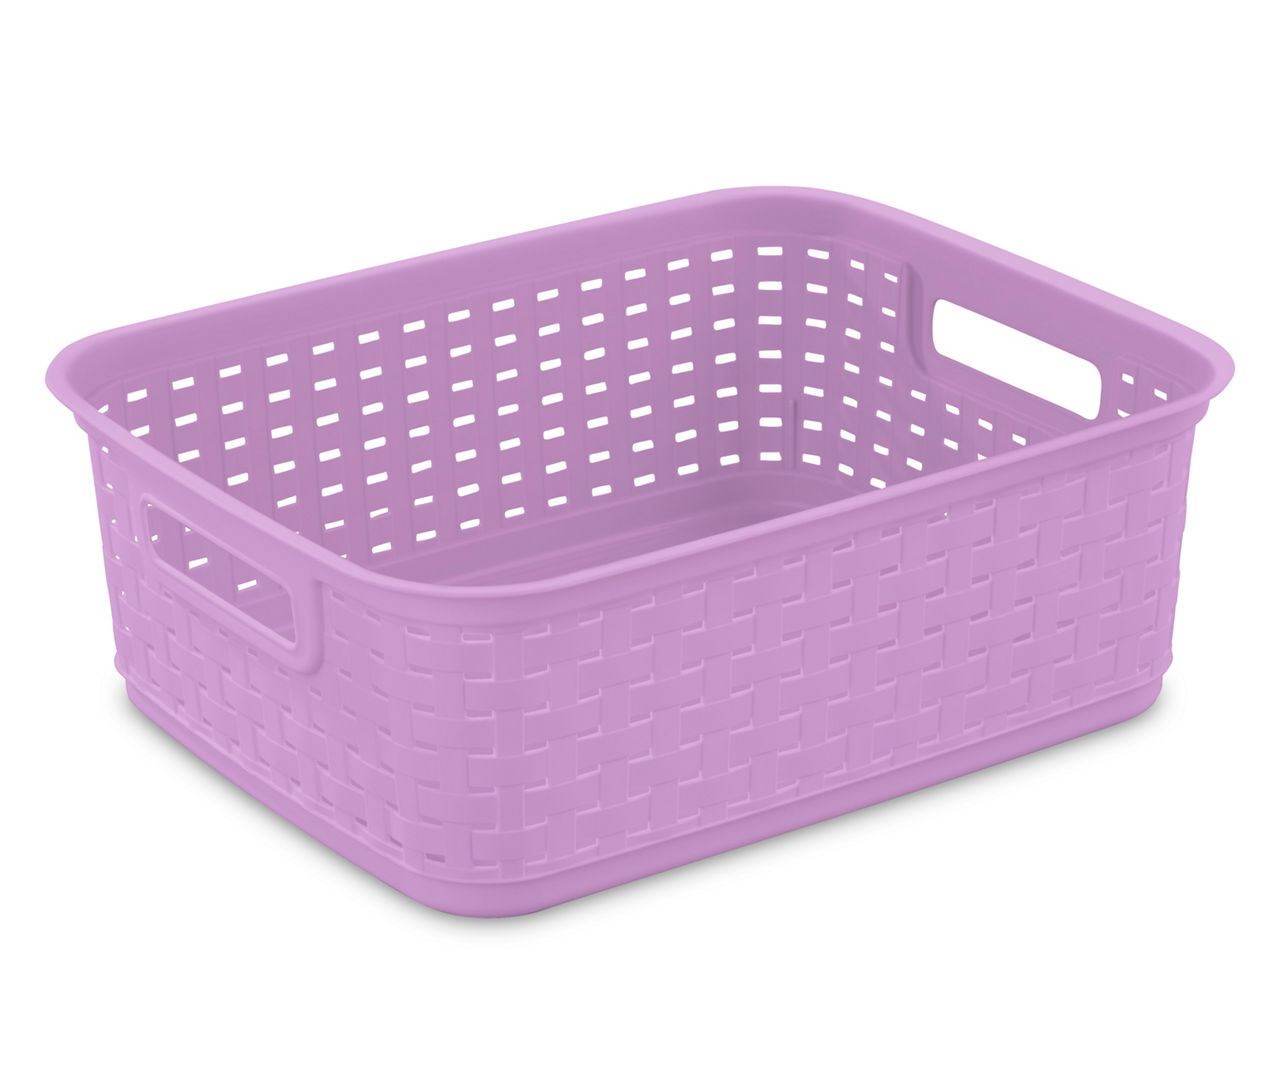 Small Plastic Baskets -- Brightly Colored